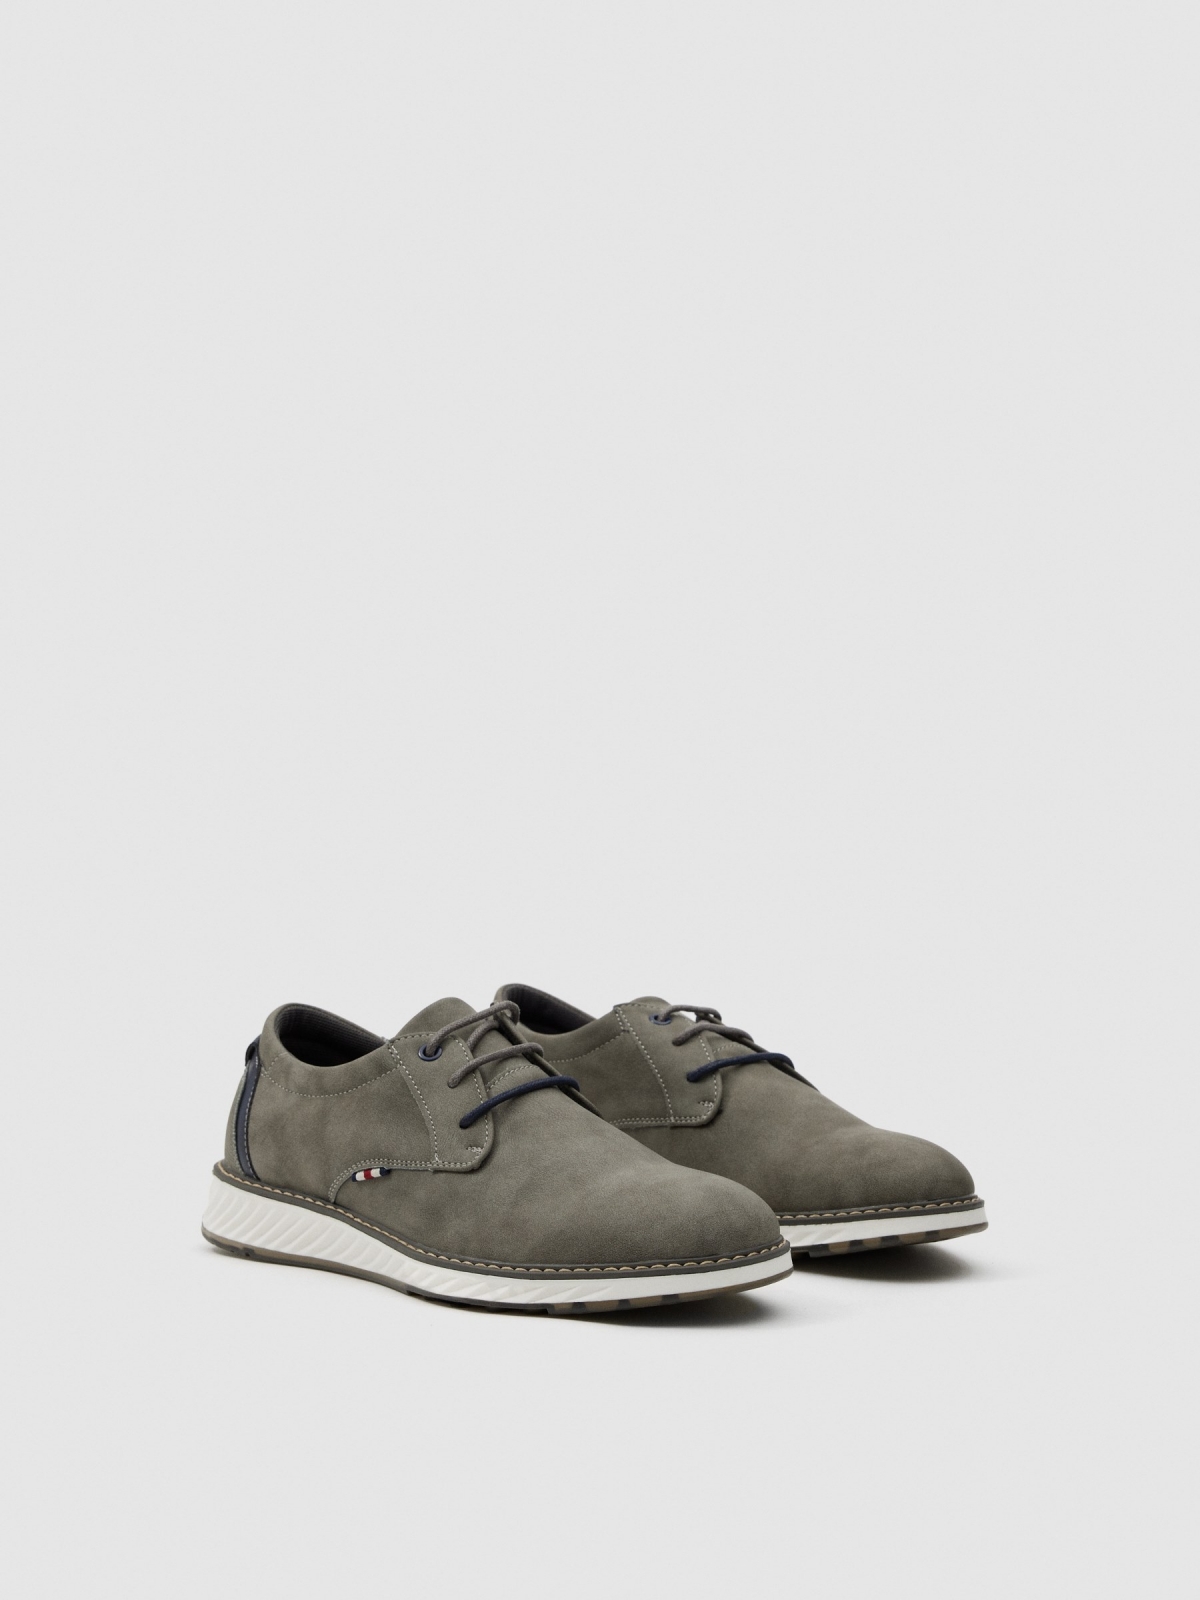 Sports shoe with laces medium grey 45º back view